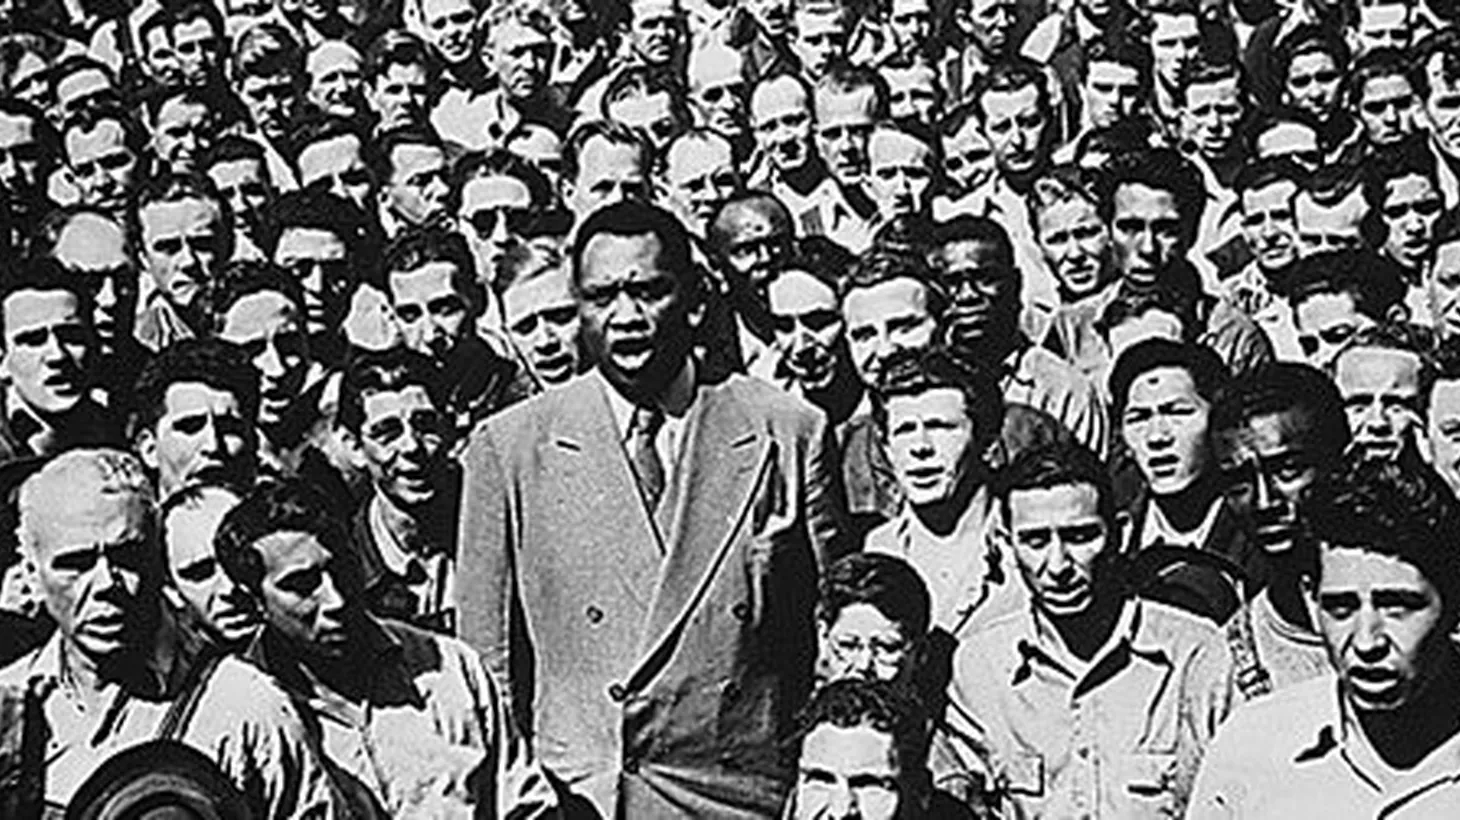 Paul Robeson, in 1942, leads Oakland shipyard workers in the singing of the National Anthem.